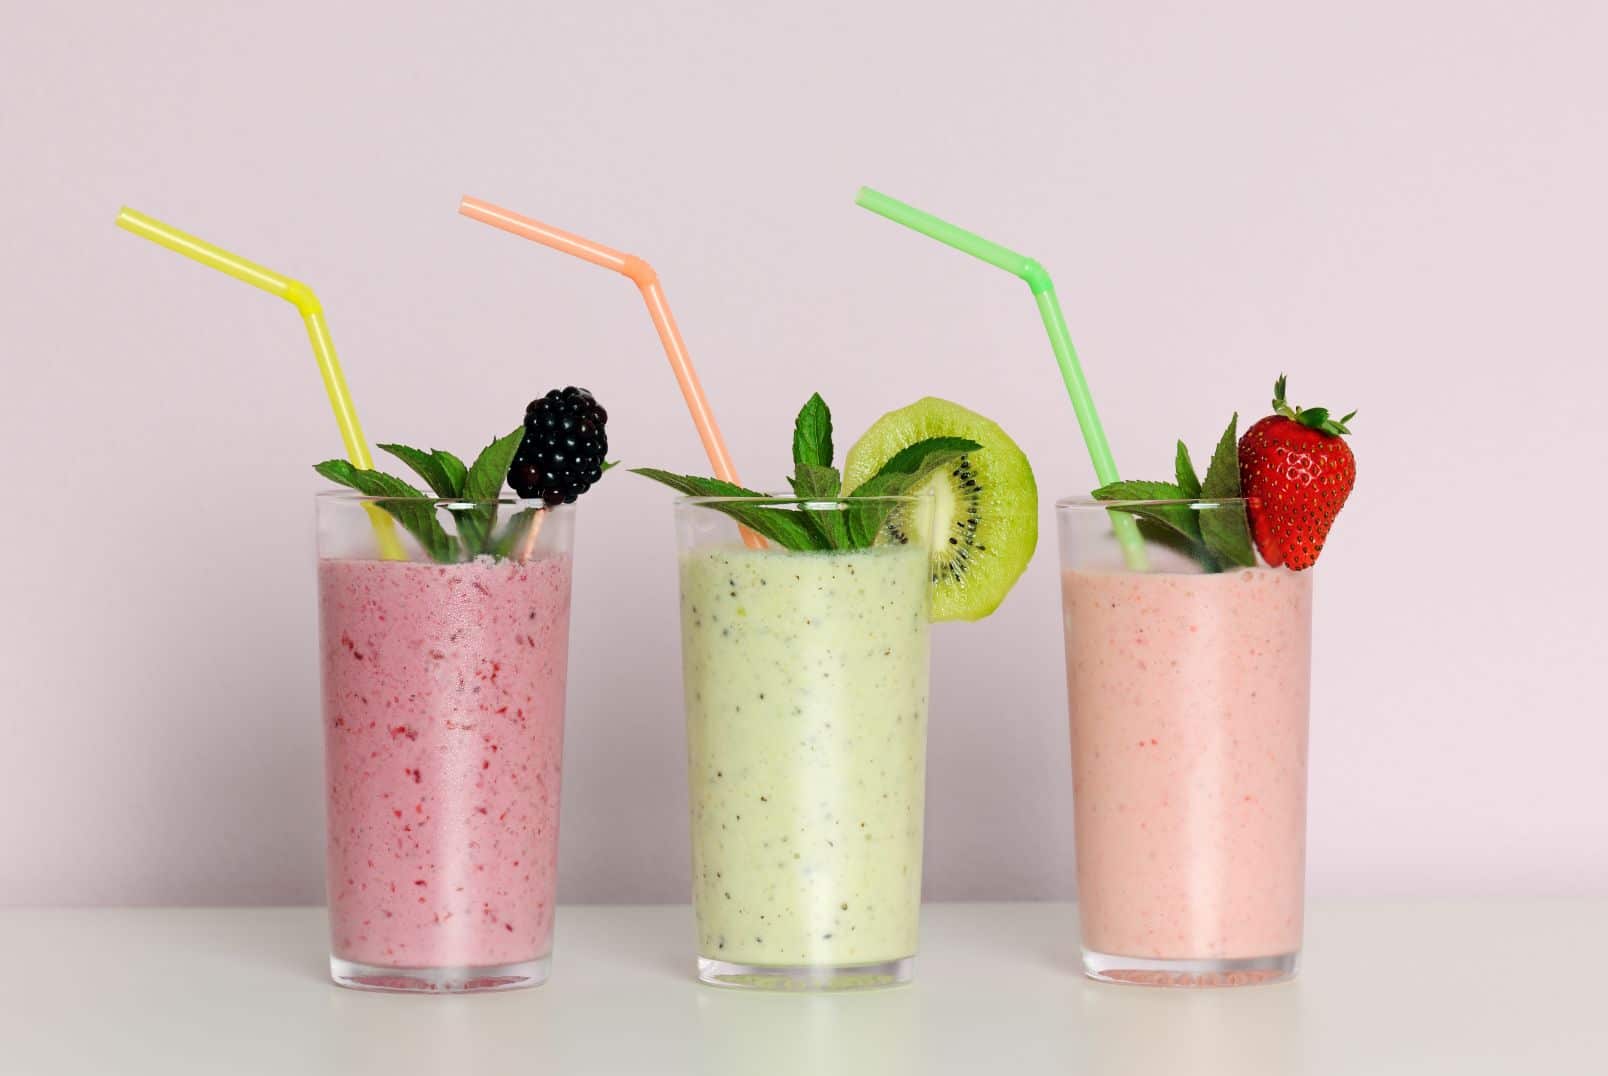 Three Fruit Smoothies with Straws in a Row